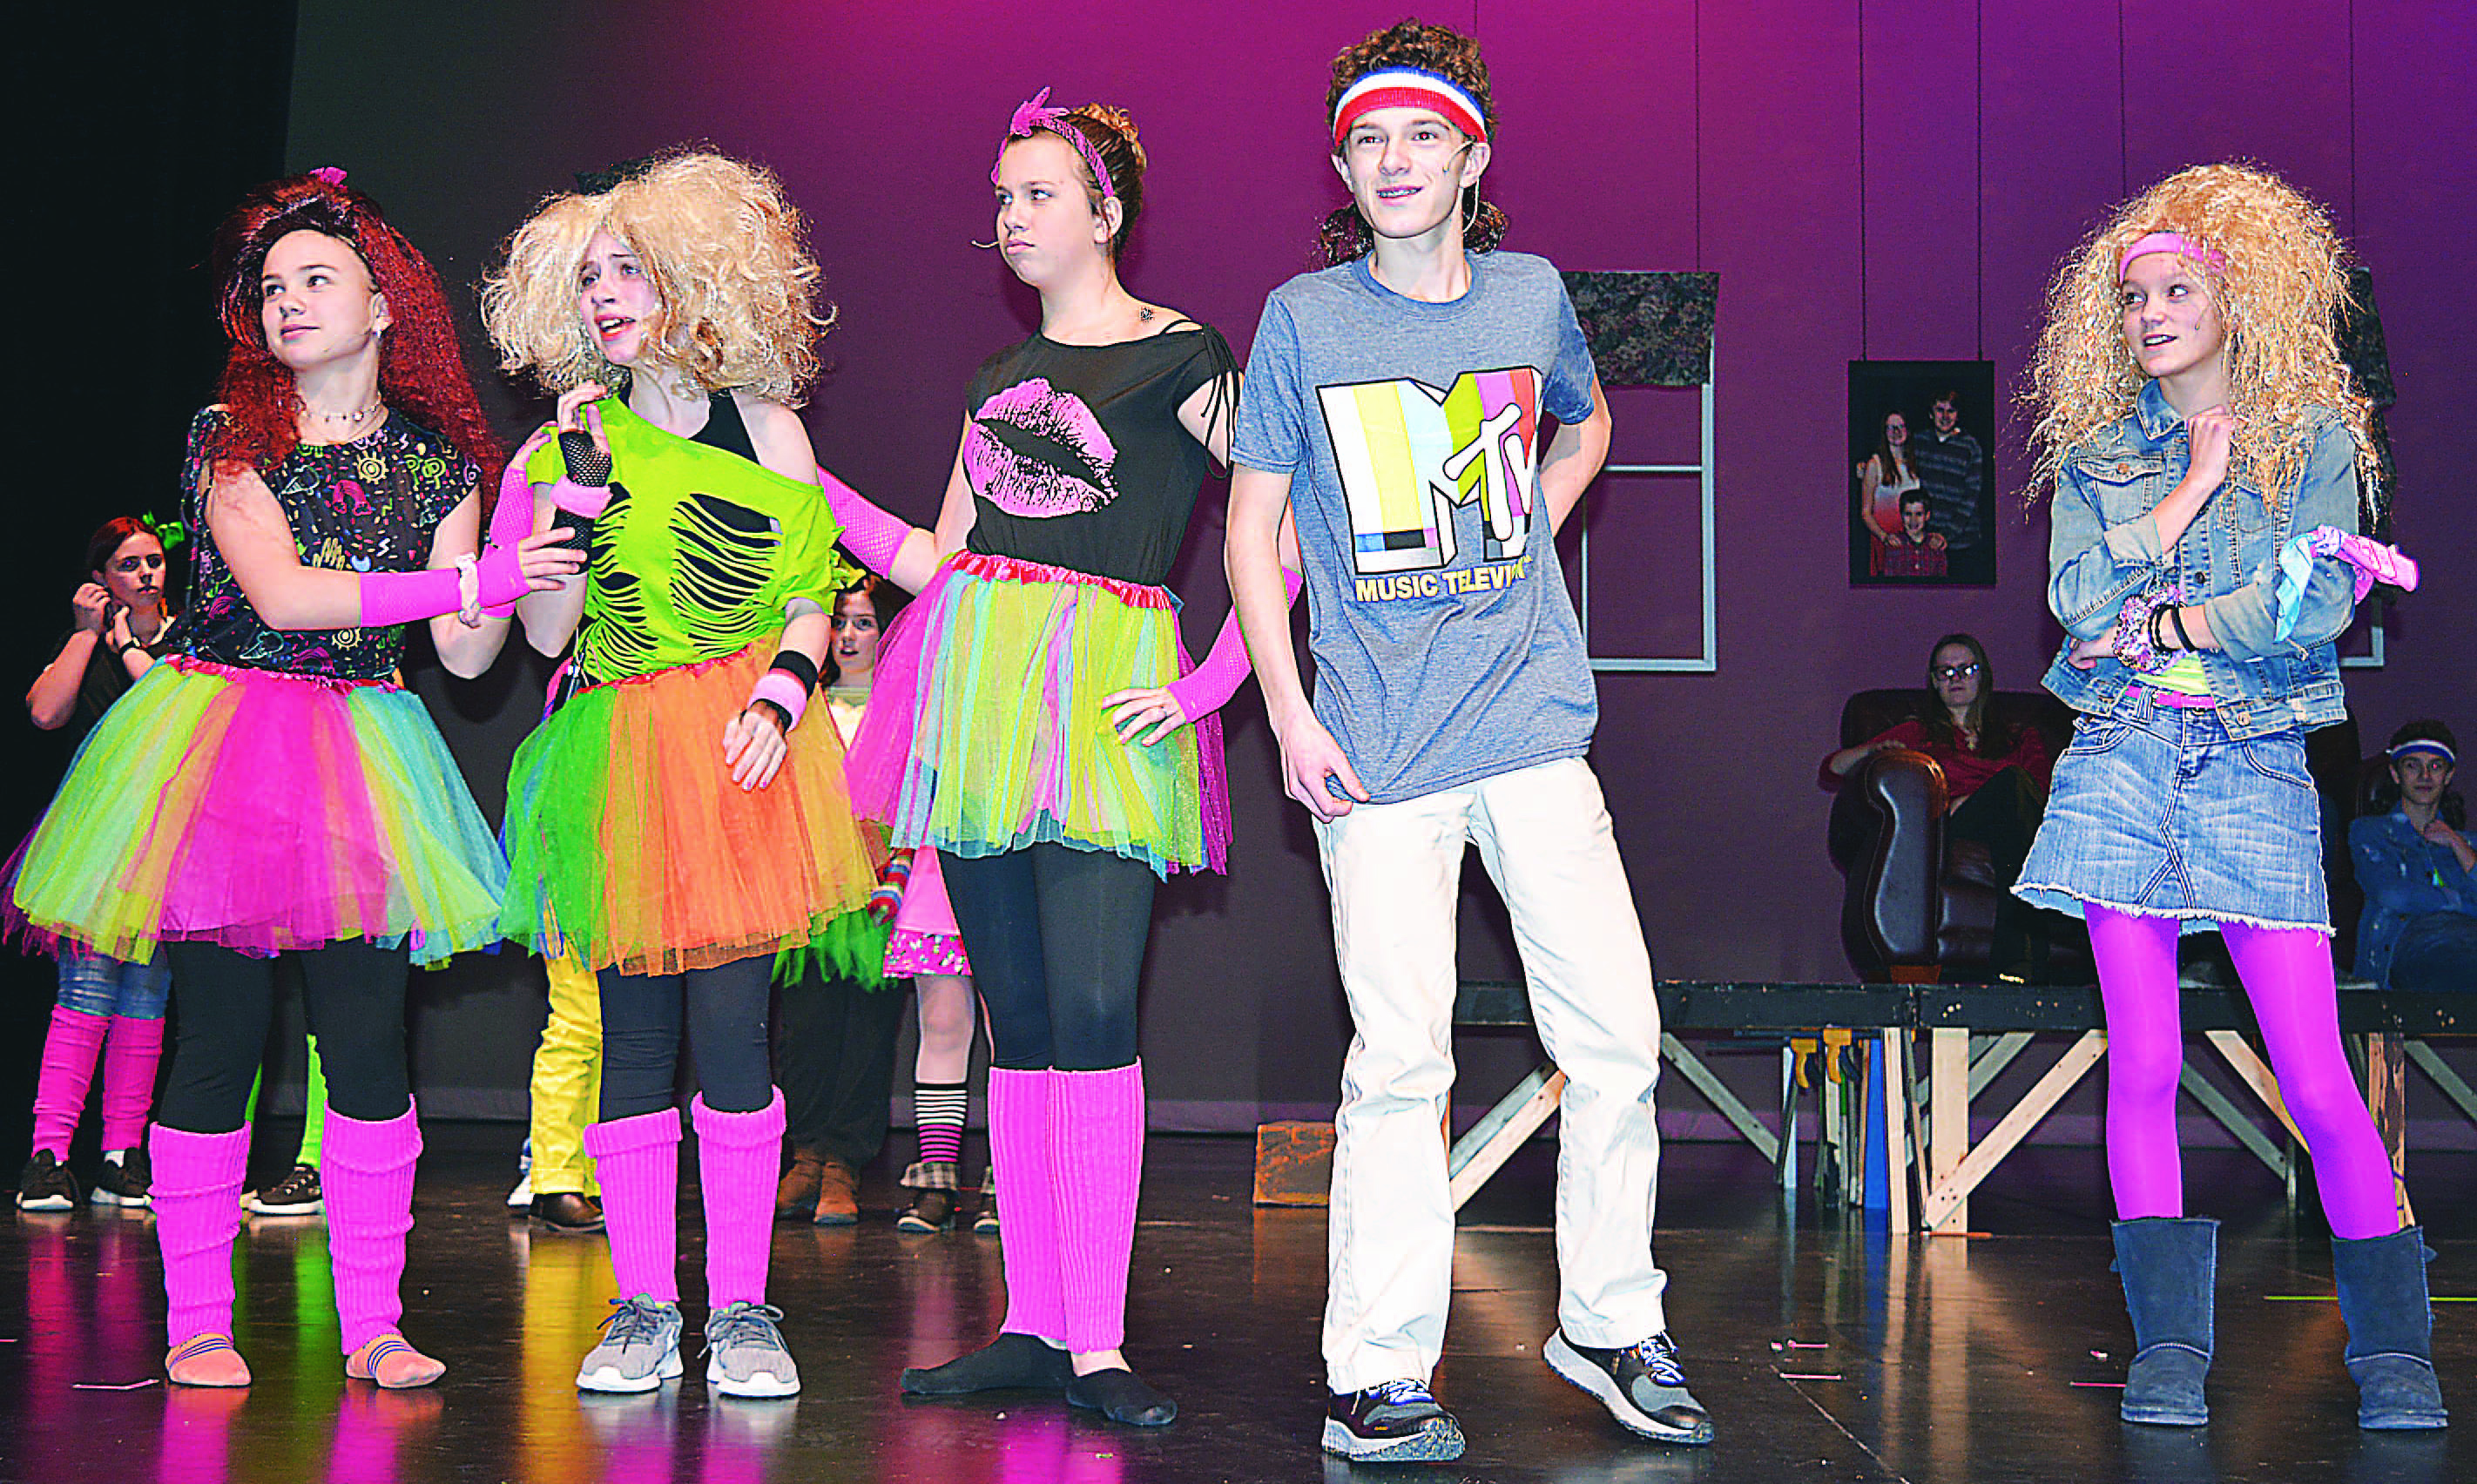 Dressed in 1980s fashions, Oxford Middle School Drama Club members (from left) Bella Delano, Lauren Schmidt, Layni Chaisson, Elijah Zelenock and Jessie Johnson rehearse a scene from the comedic play, “That’s Not How I Remember It.” It’s coming to the high school stage on Jan. 17 and Jan. 18. Photo by C.J. Carnacchio.